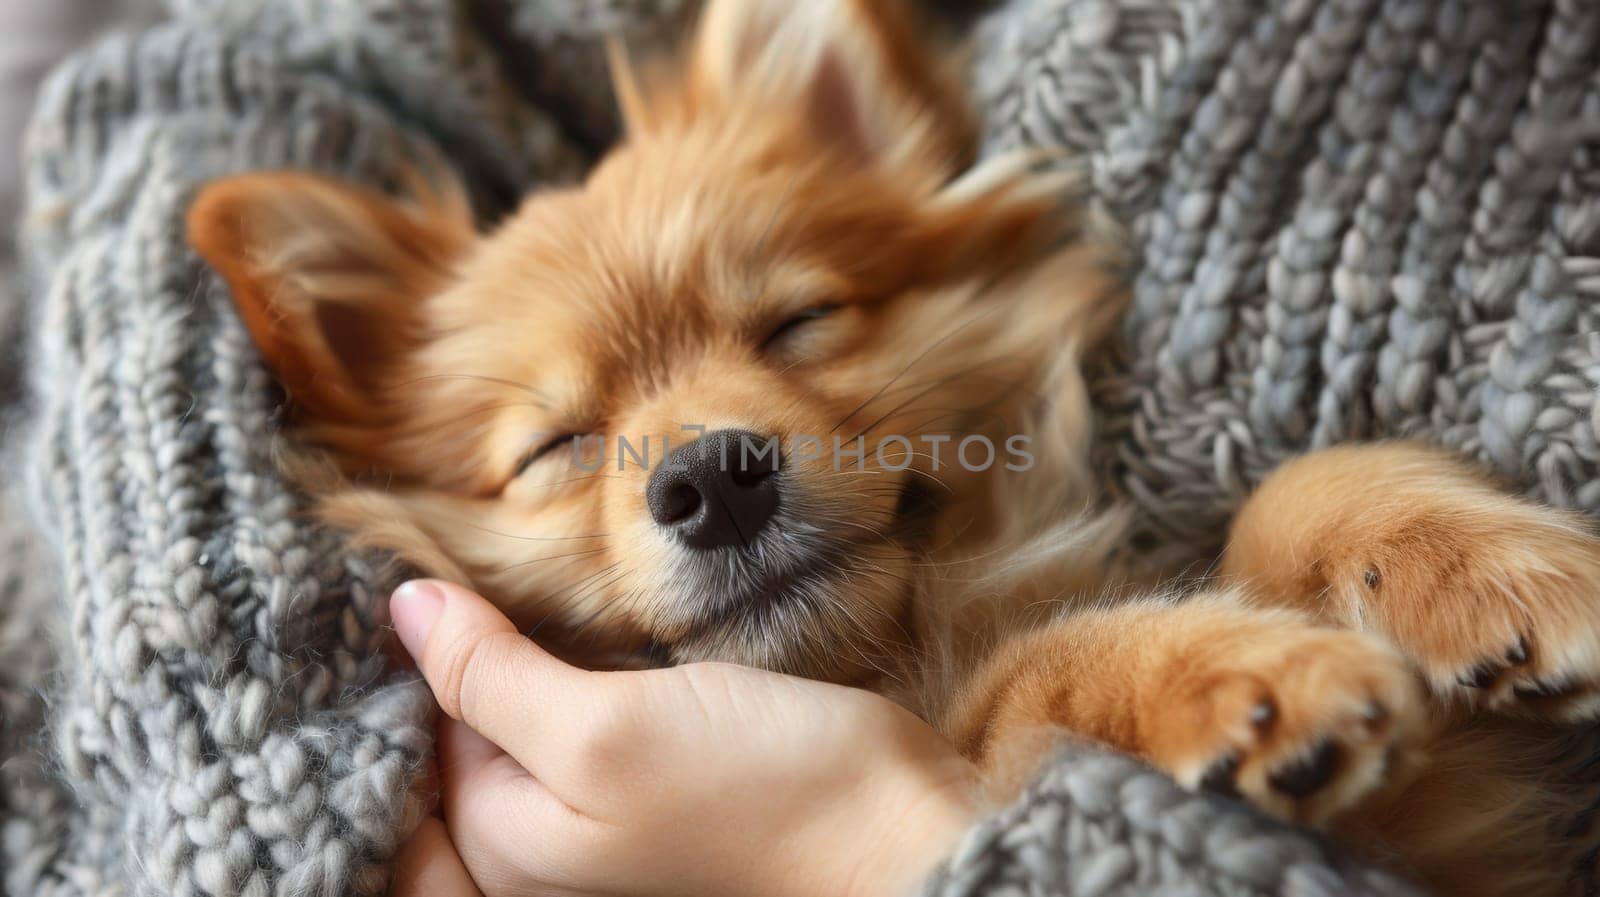 A small dog laying on a person's lap with its eyes closed